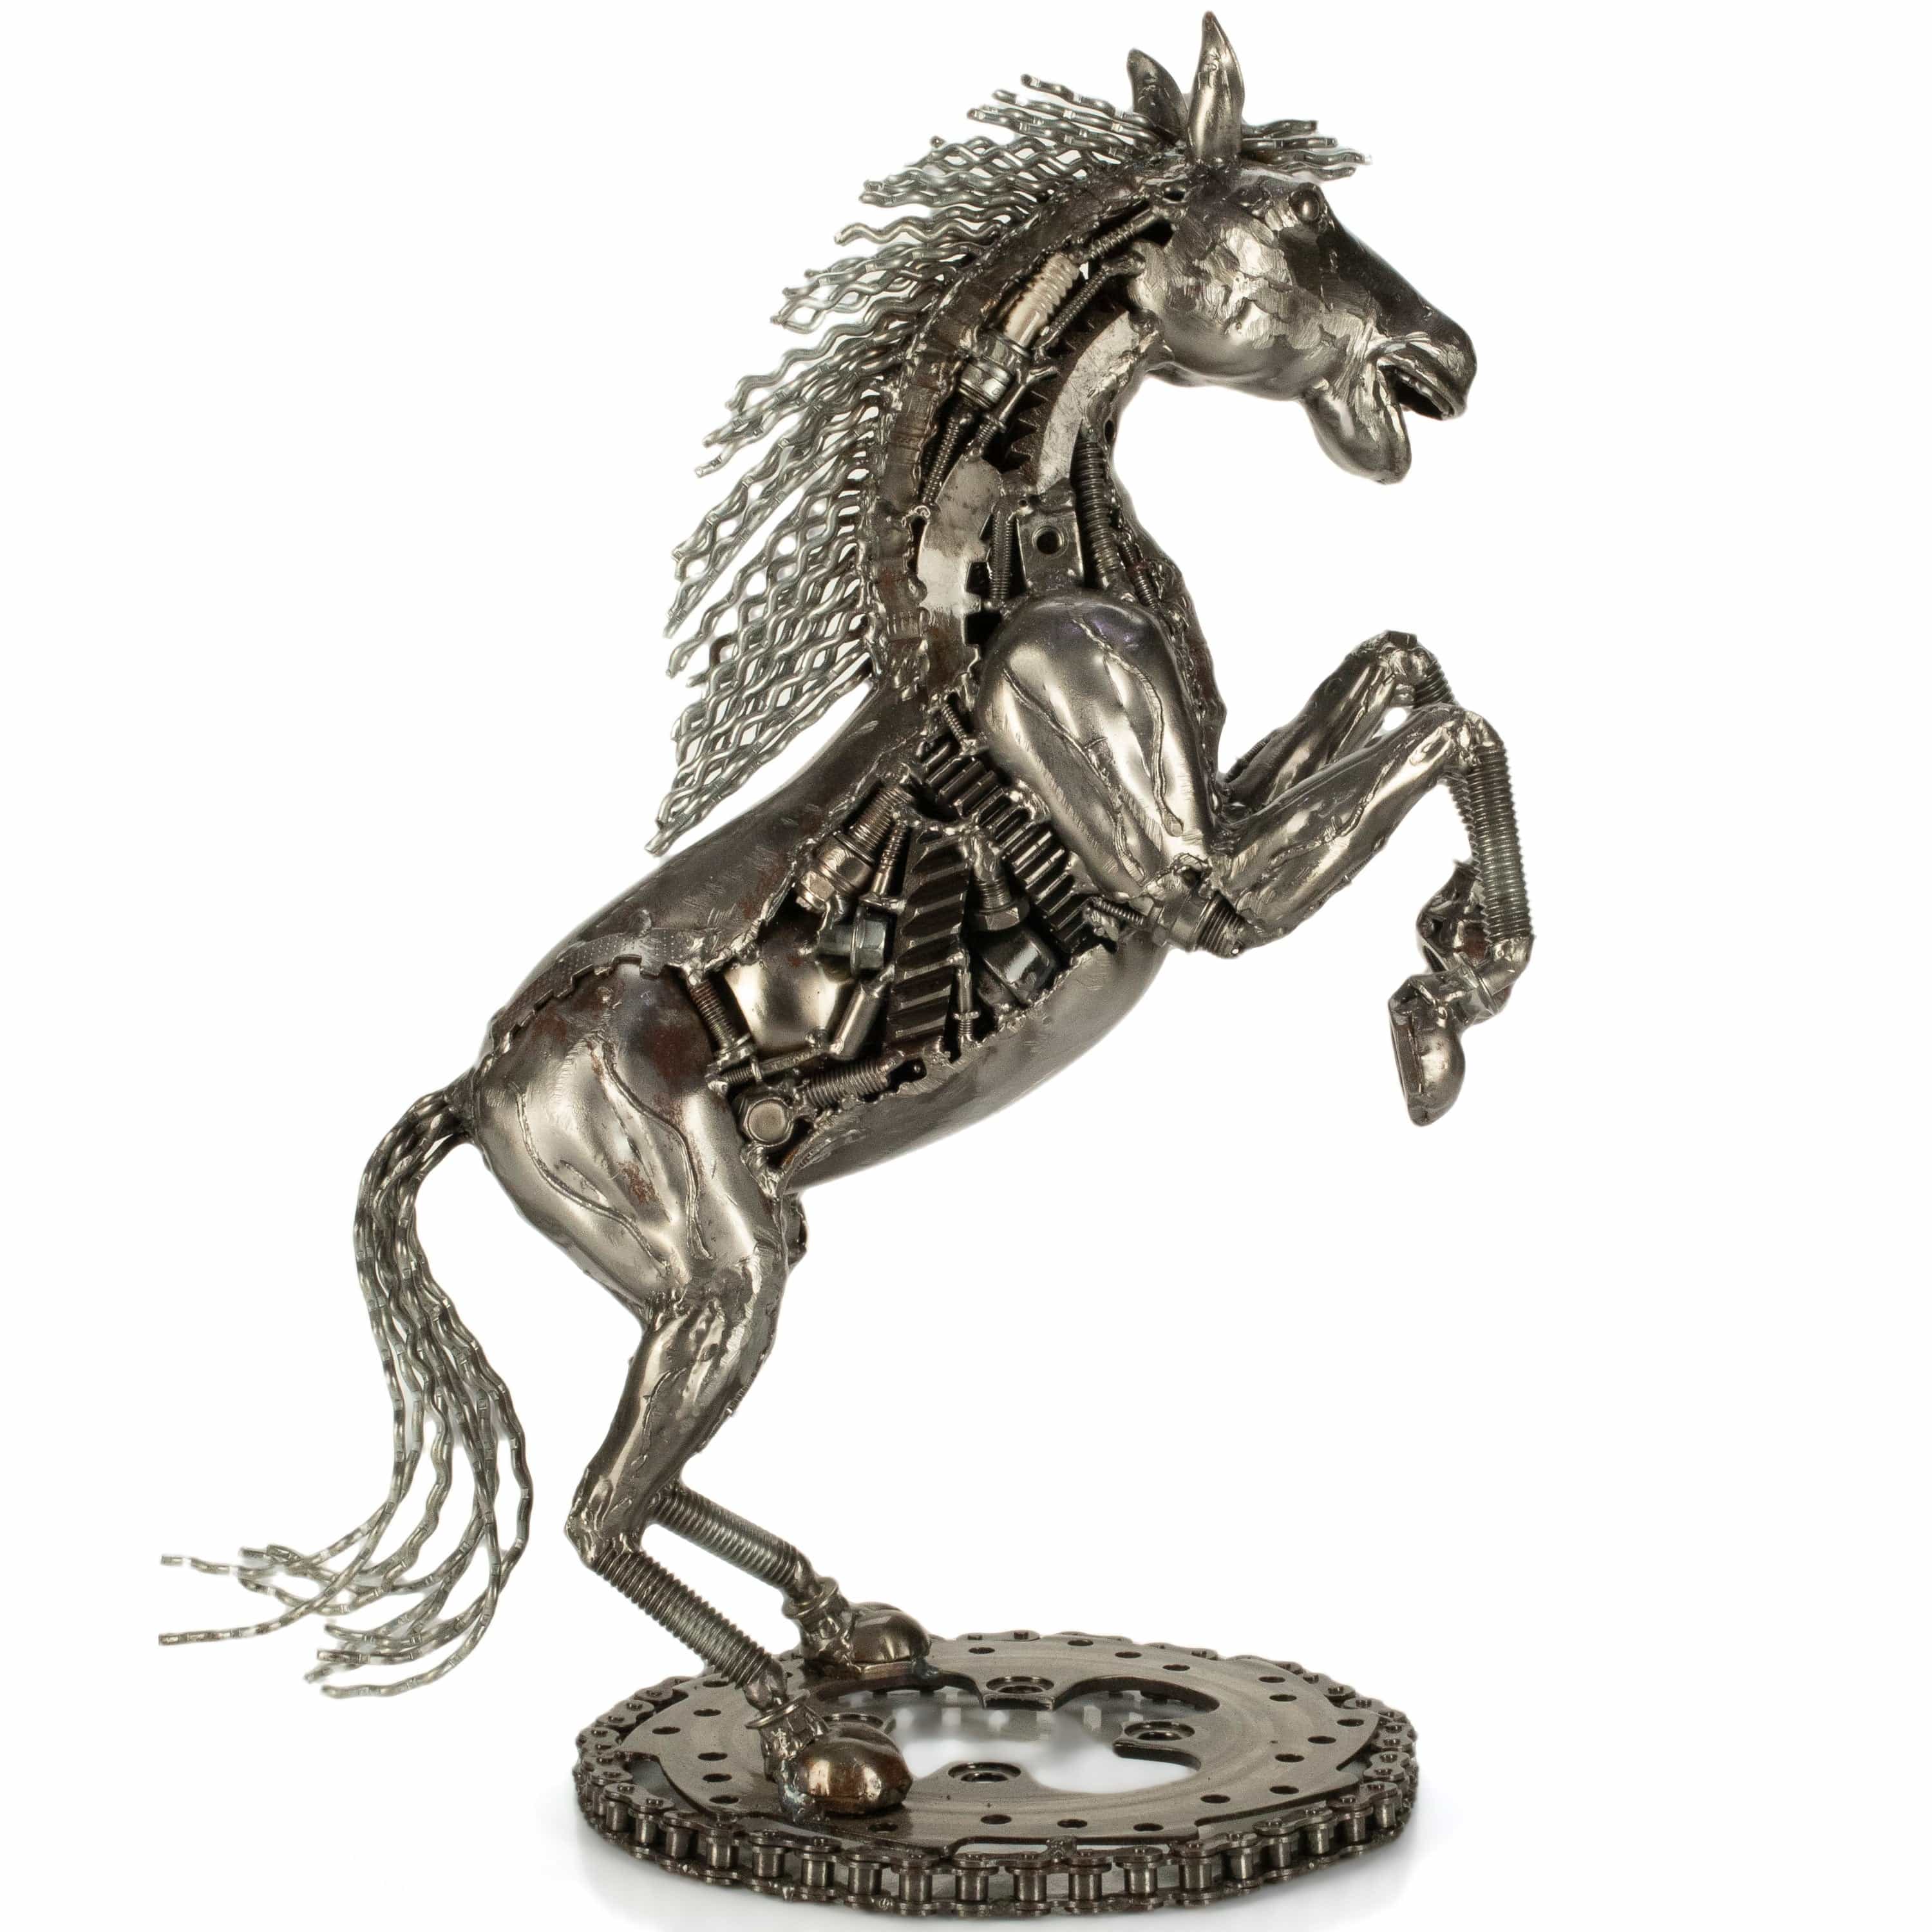 KALIFANO Recycled Metal Art Galloping Horse Inspired Recycled Metal Art Sculpture RMS-3000HS-PK